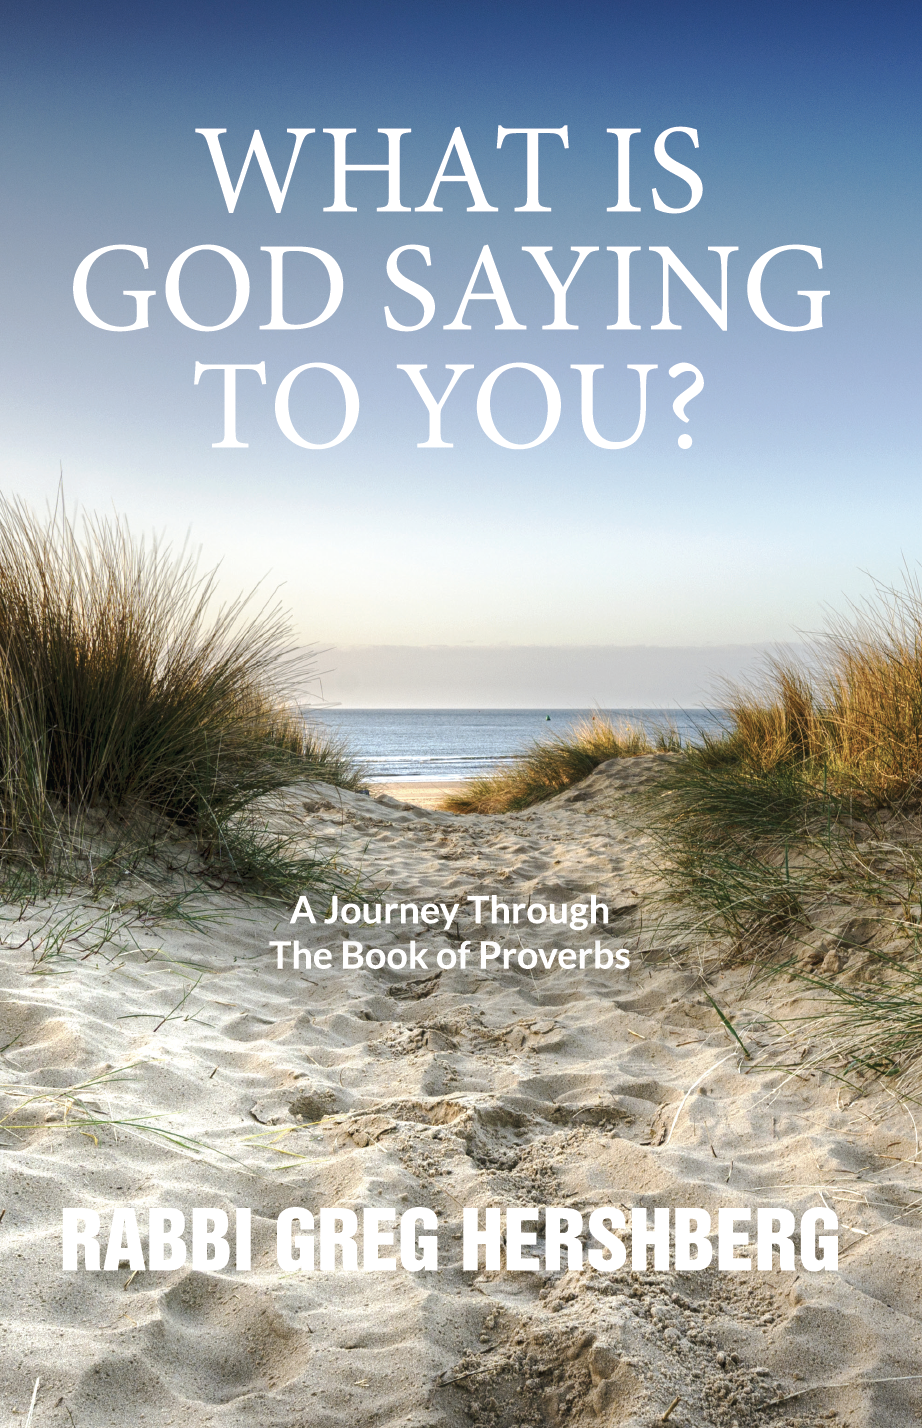 WHAT IS GOD SAYING TO YOU? A Journey Through Proverbs